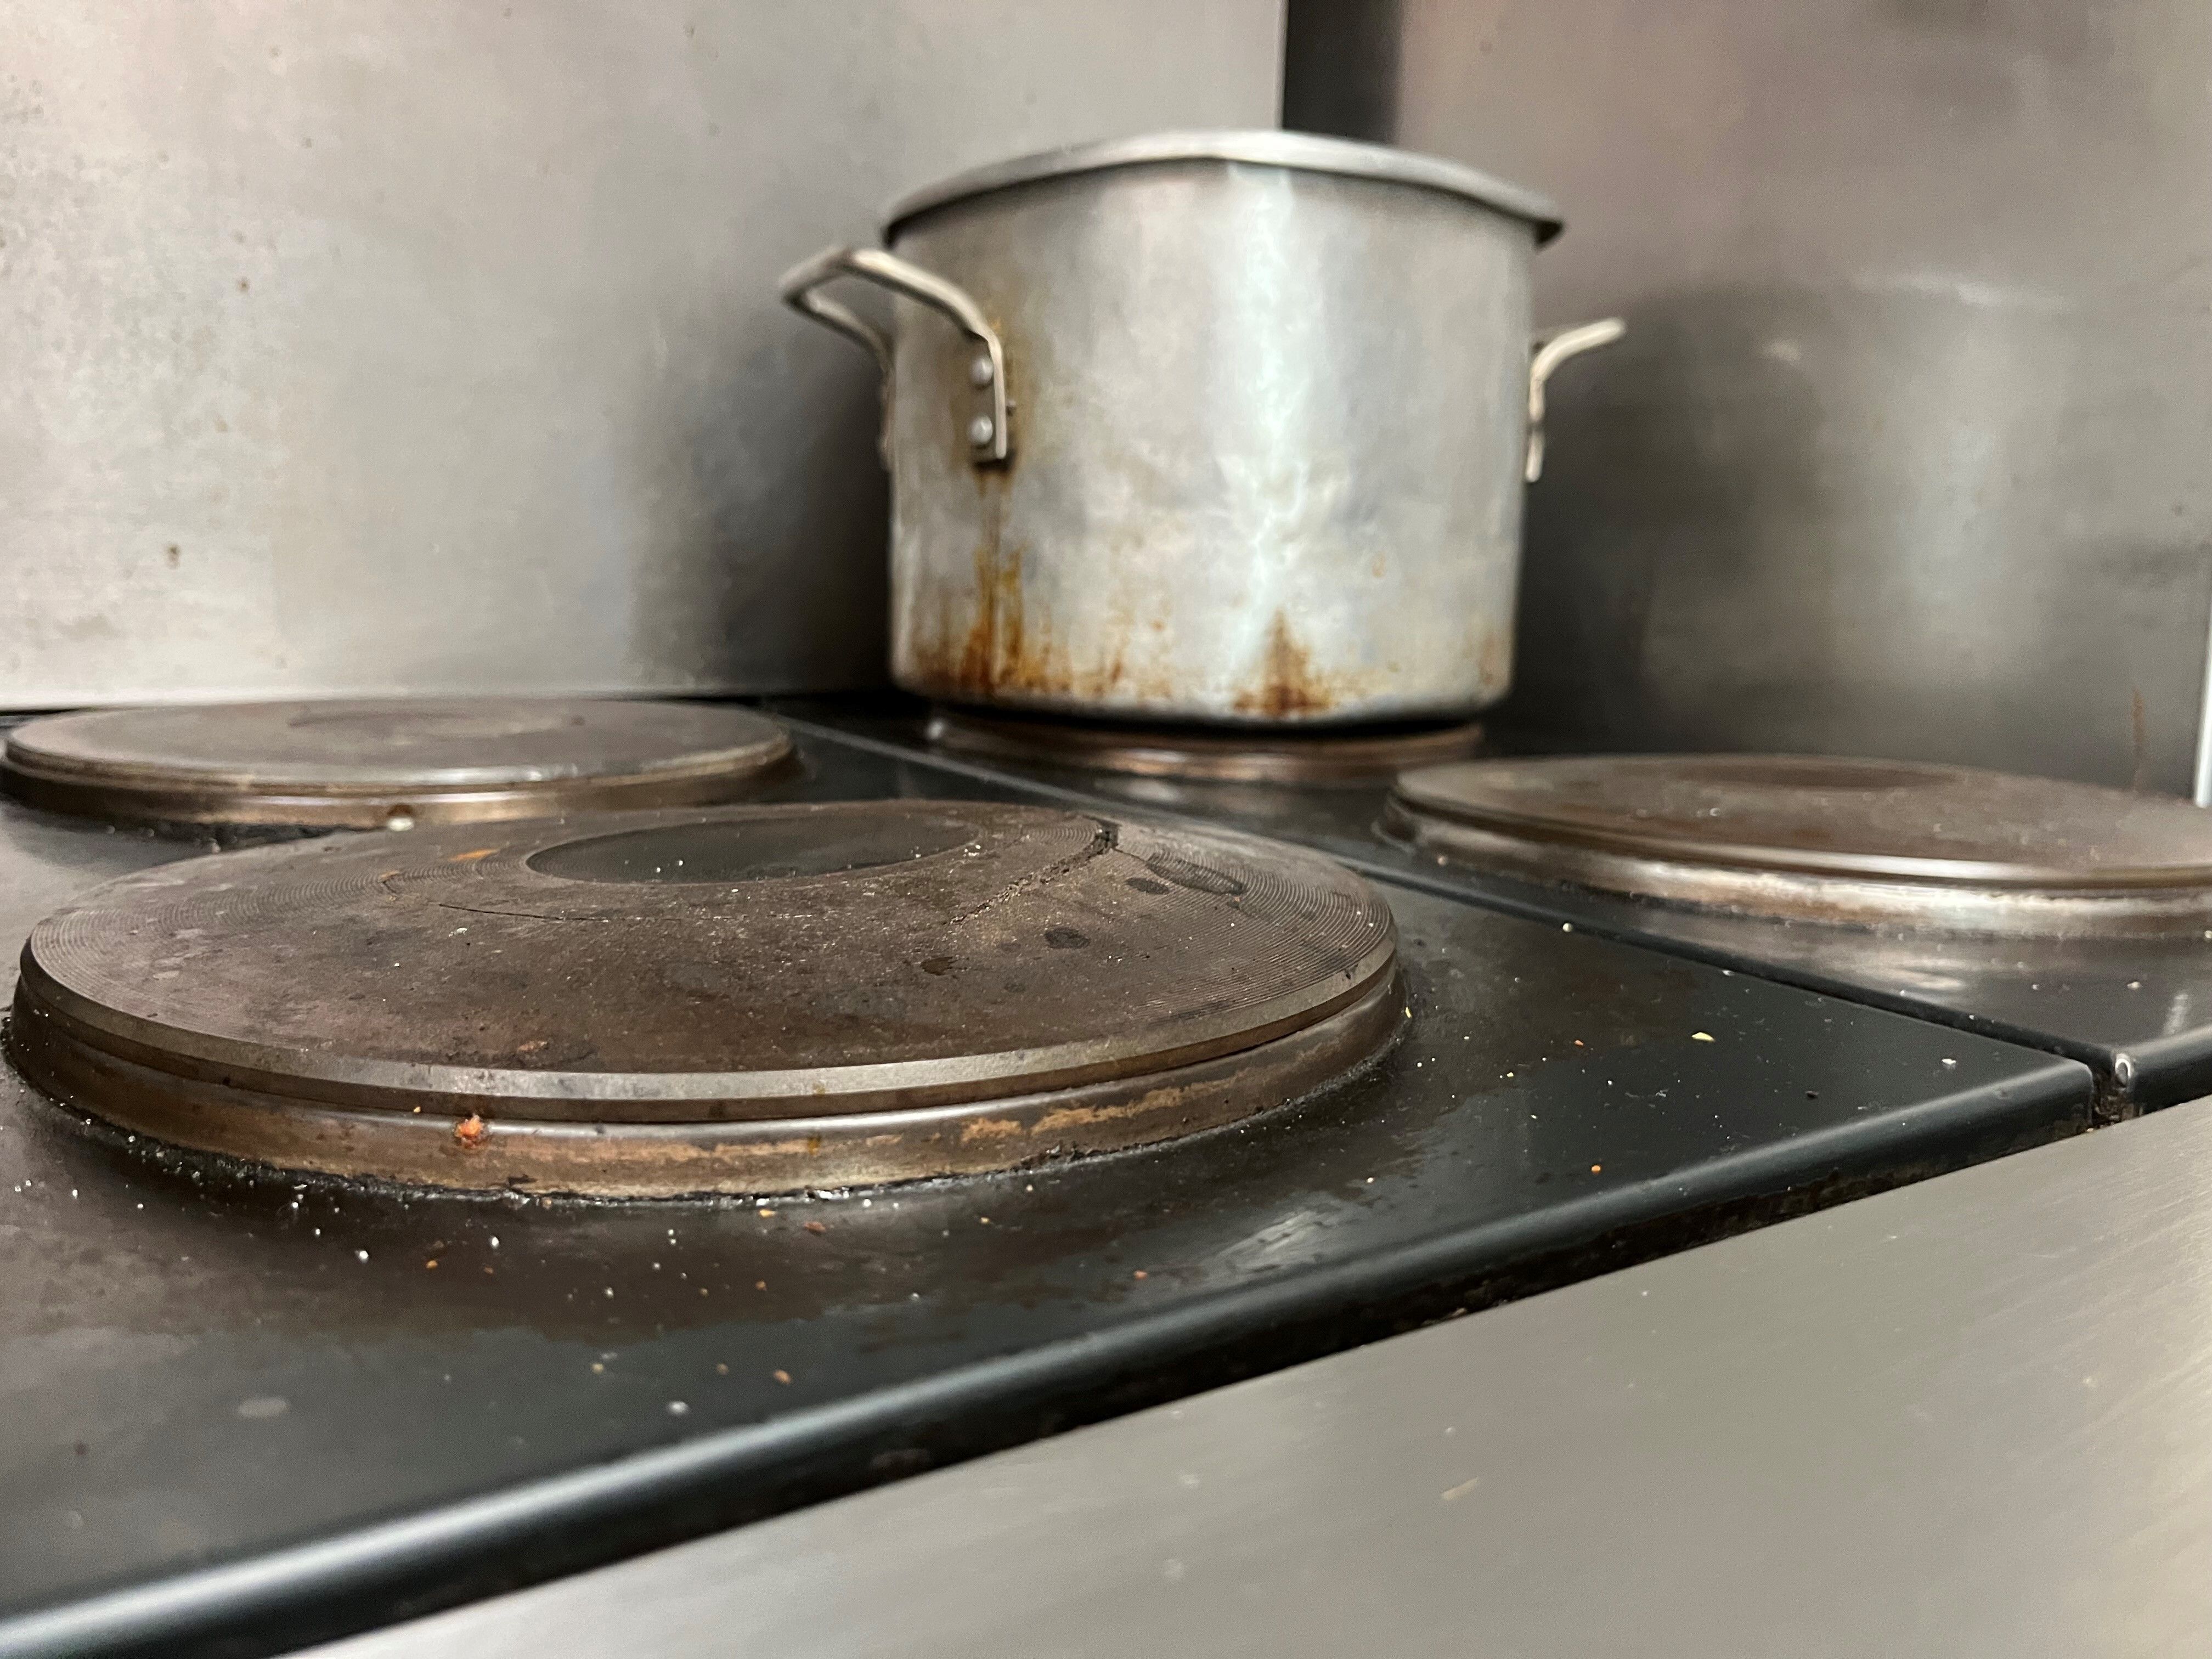 The broken stovetop in the George Street kitchen.